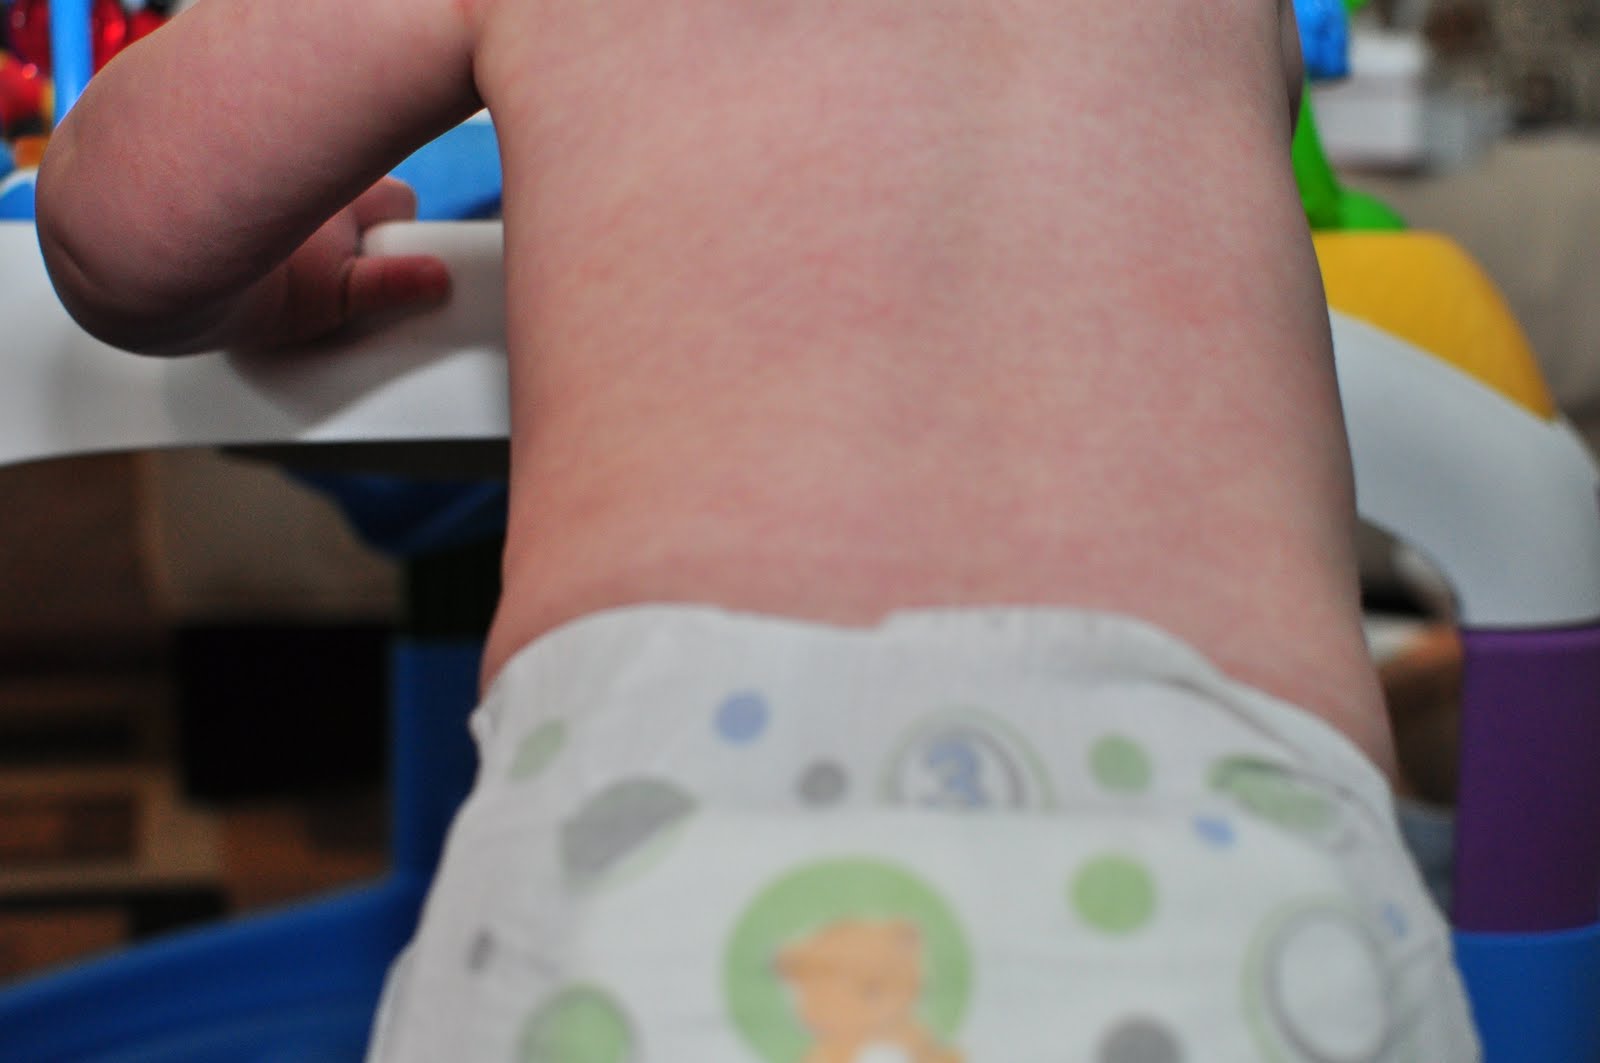 Roseola (Sixth Disease) Symptoms, Treatment & Pictures